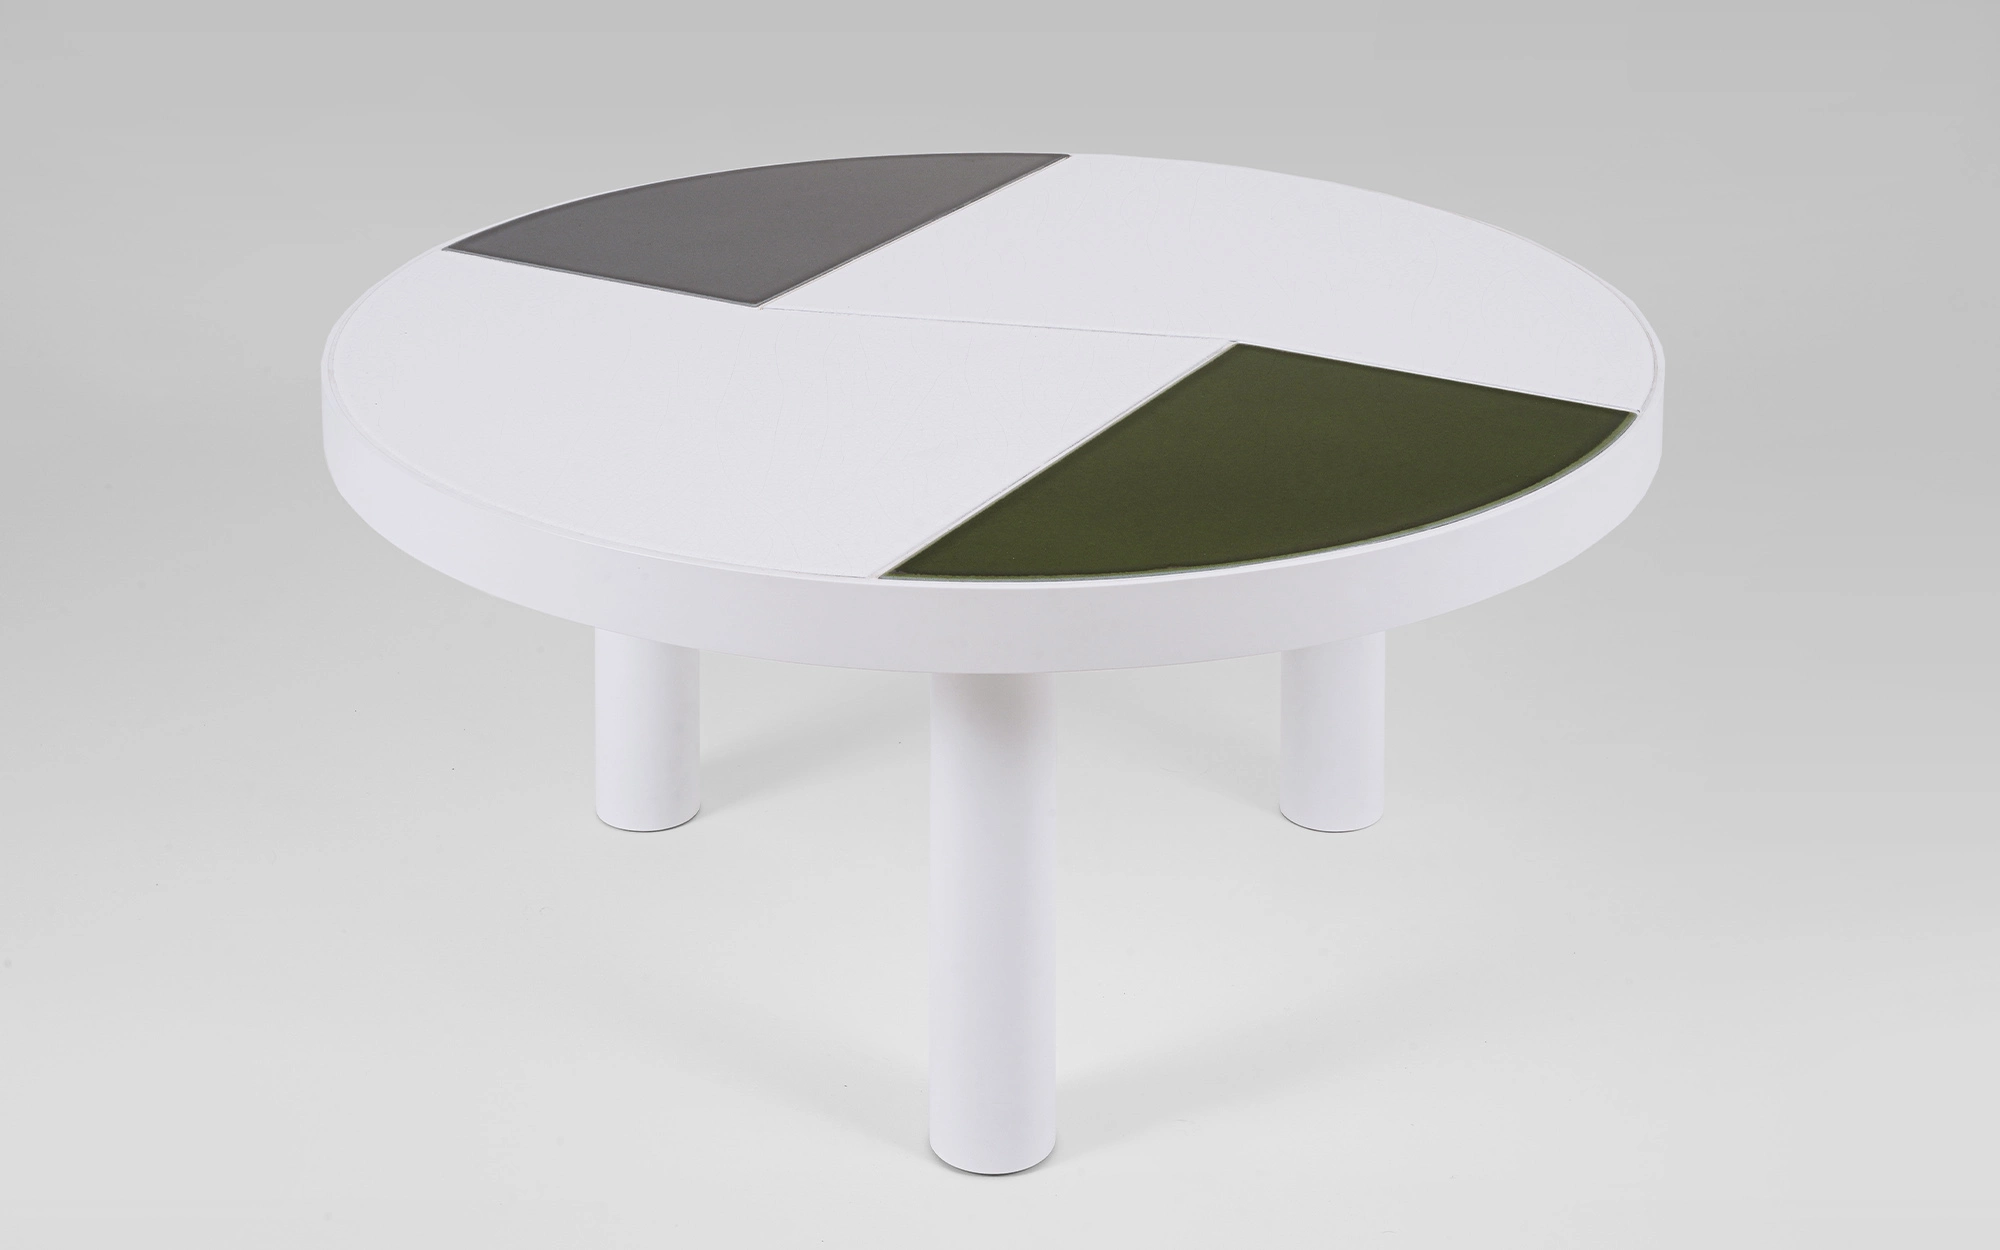 Fraction Coffee Table - Pierre Charpin - Table light - Galerie kreo